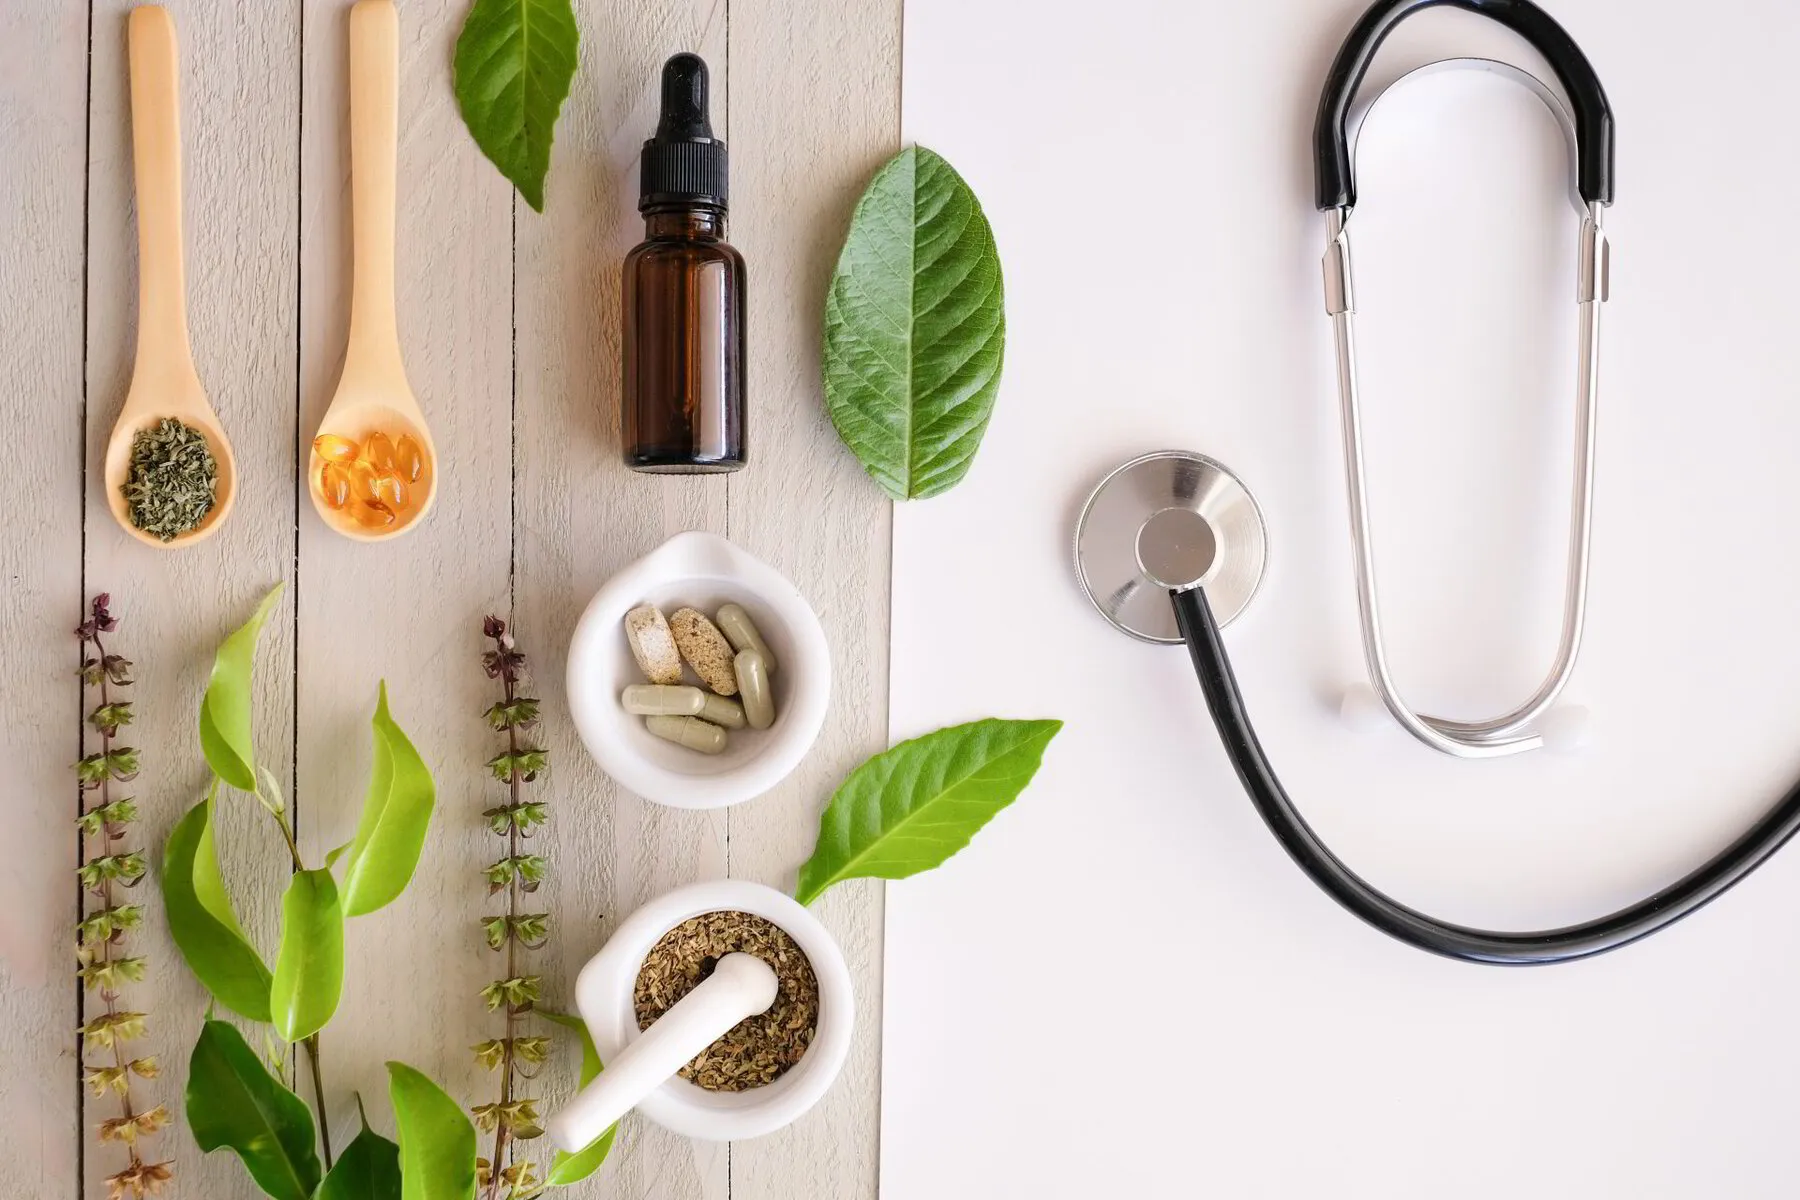 Herbal supplements and a stethoscope on a split white and wooden background, representing alternative and conventional medicine.